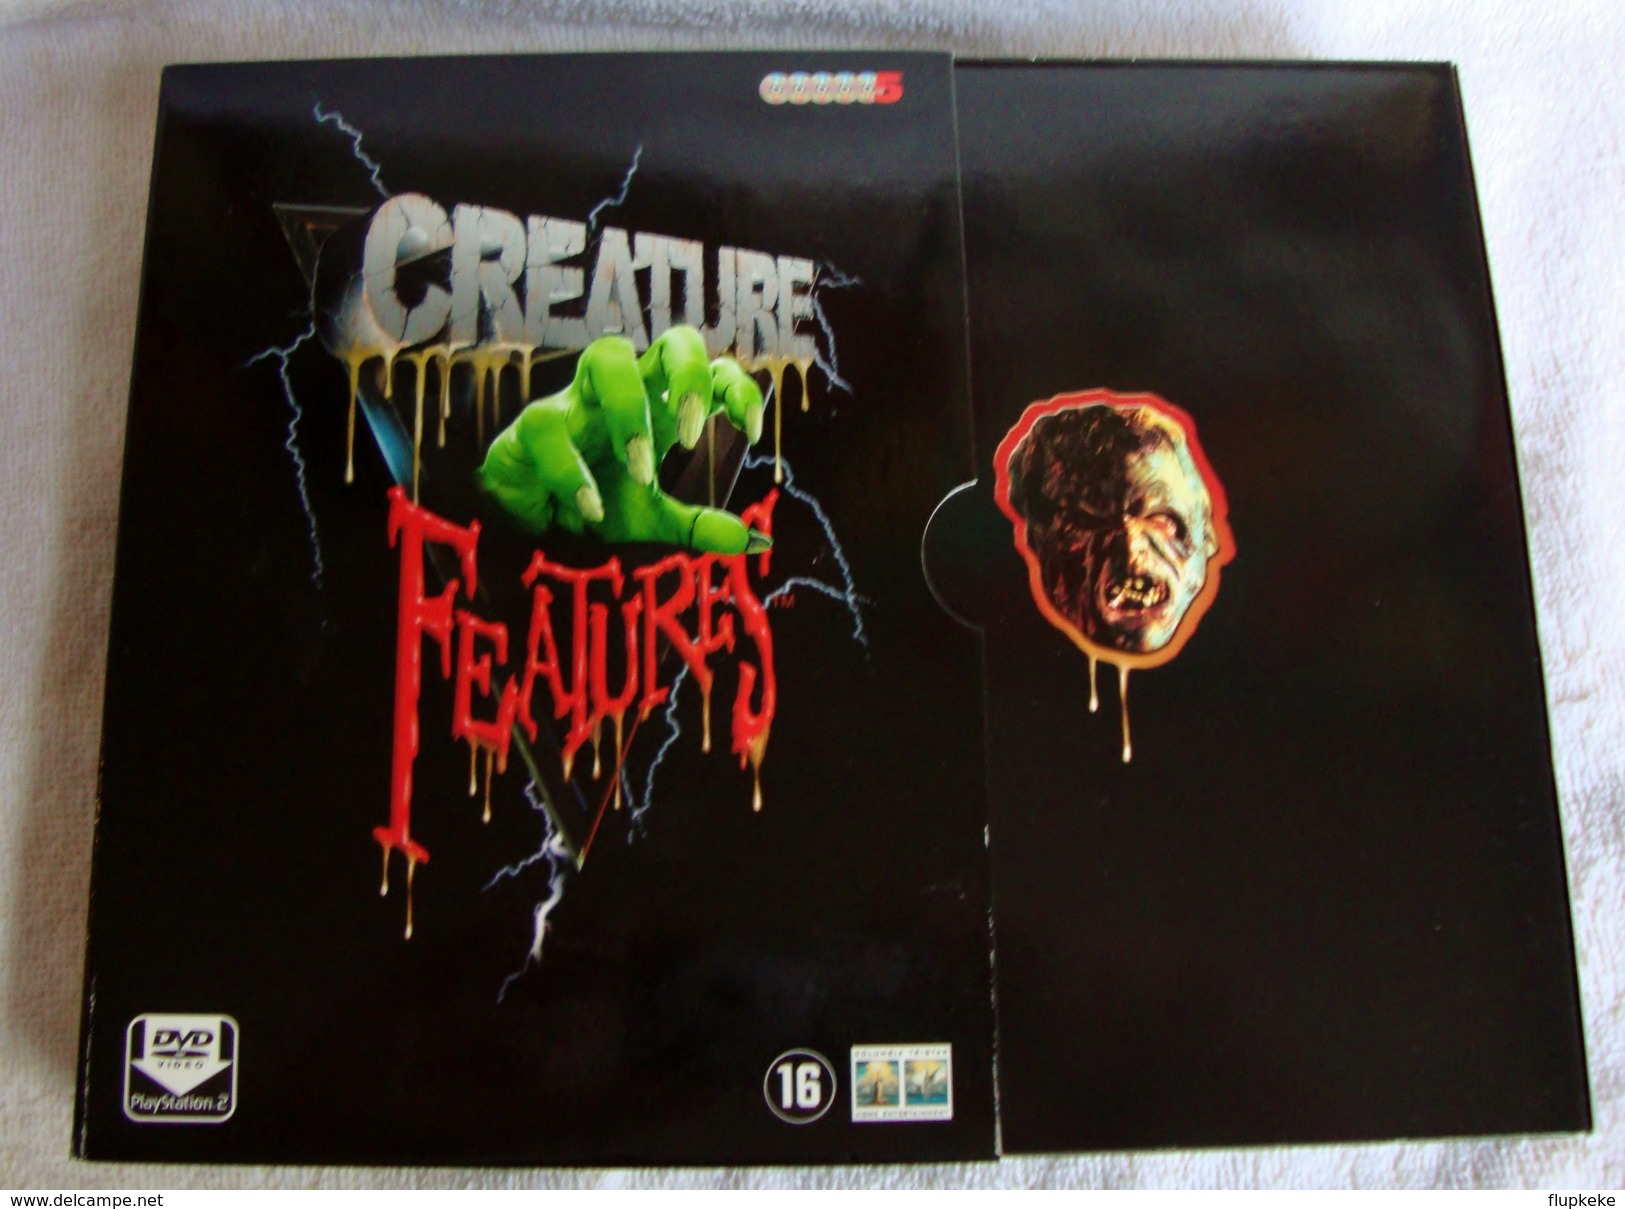 Dvd Zone 2 Creature Features She Creature The Day the World Ended Earth vs. Spider Teenage Caveman How to Make a Monster